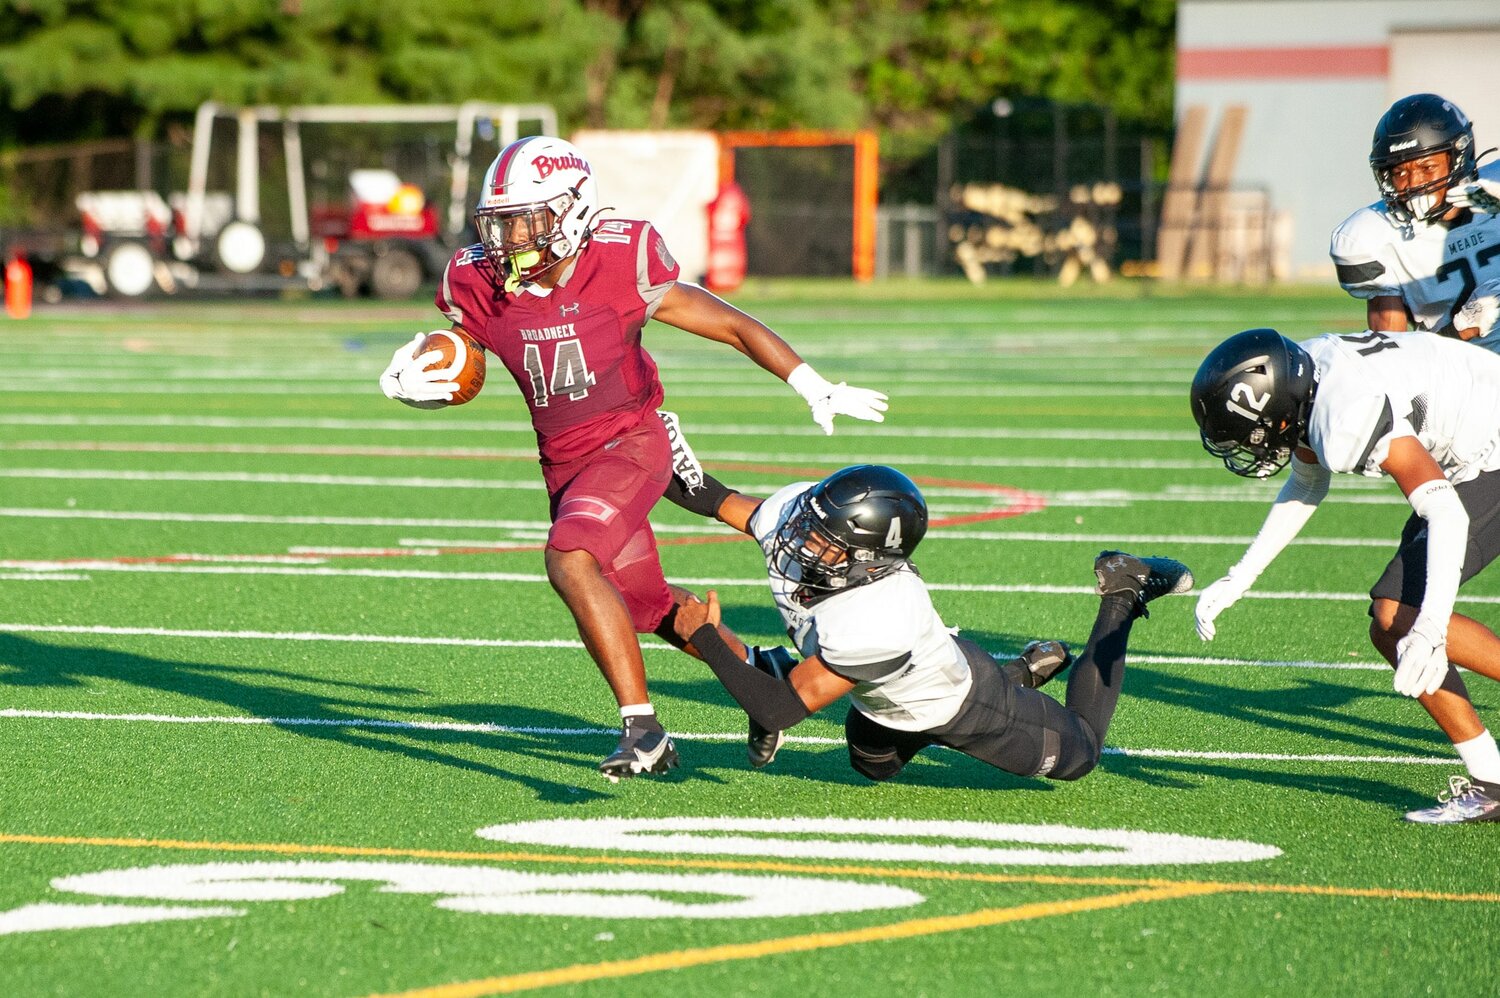 Broadneck receiver Aaron Foote (14) slipped through the Meade defense for a 39-yard touchdown reception.